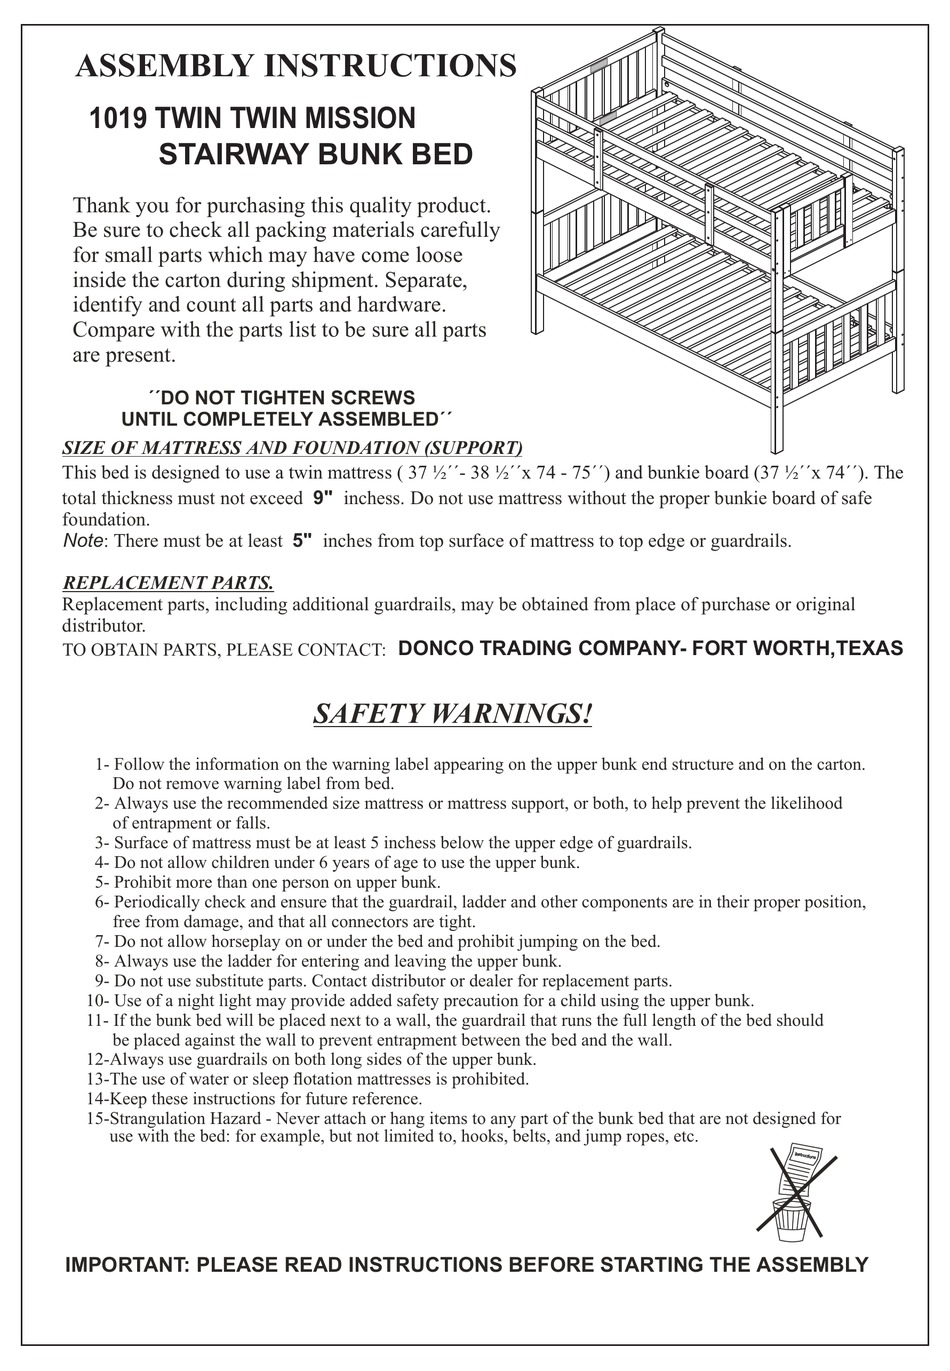 Donco 1019 Assembly Instructions Manual, Donco Bunk Bed Assembly Instructions